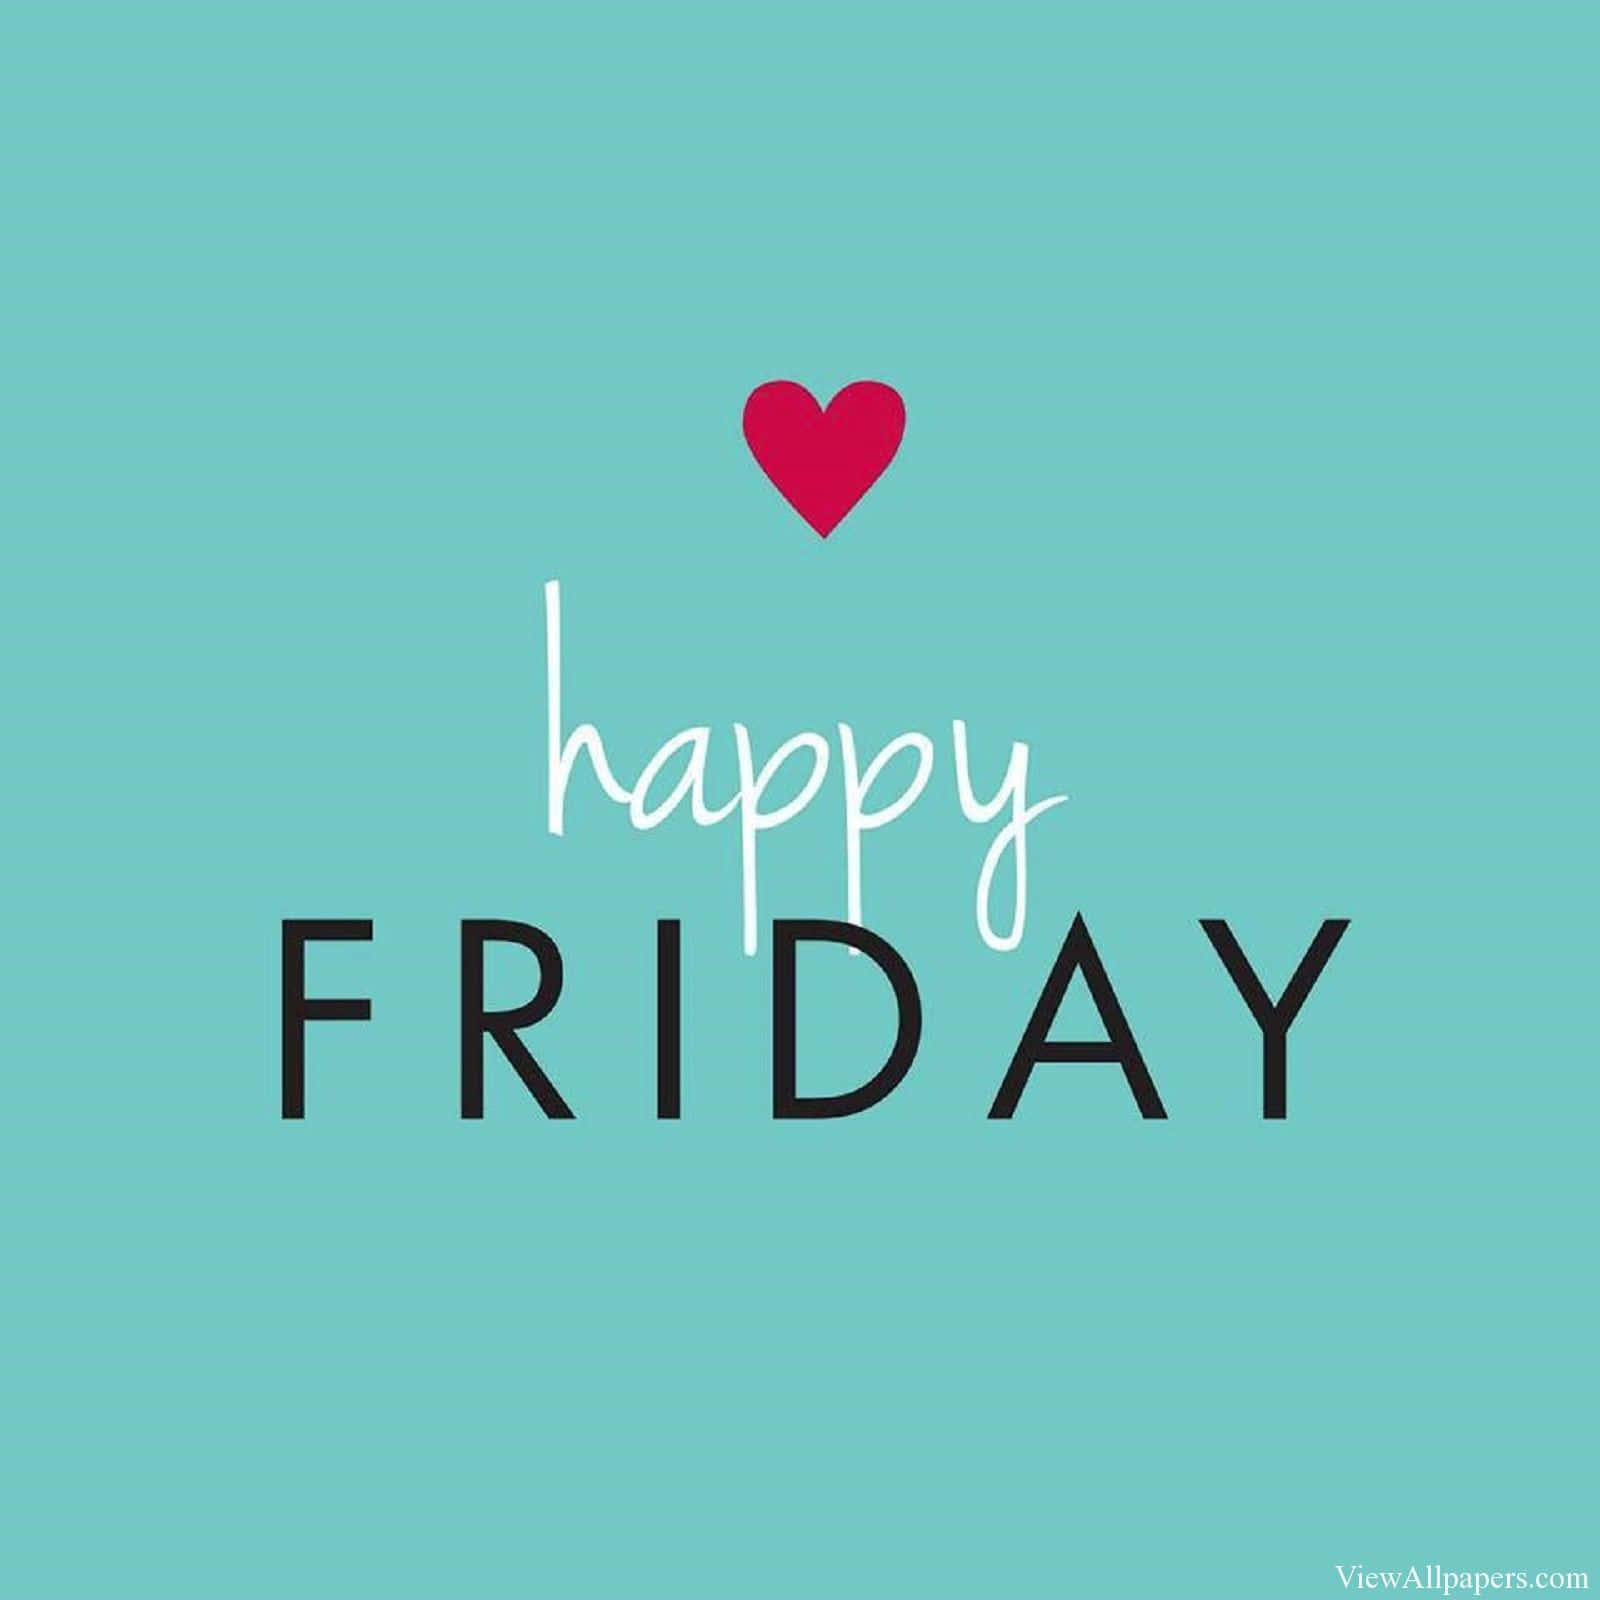 It's Friday! Background